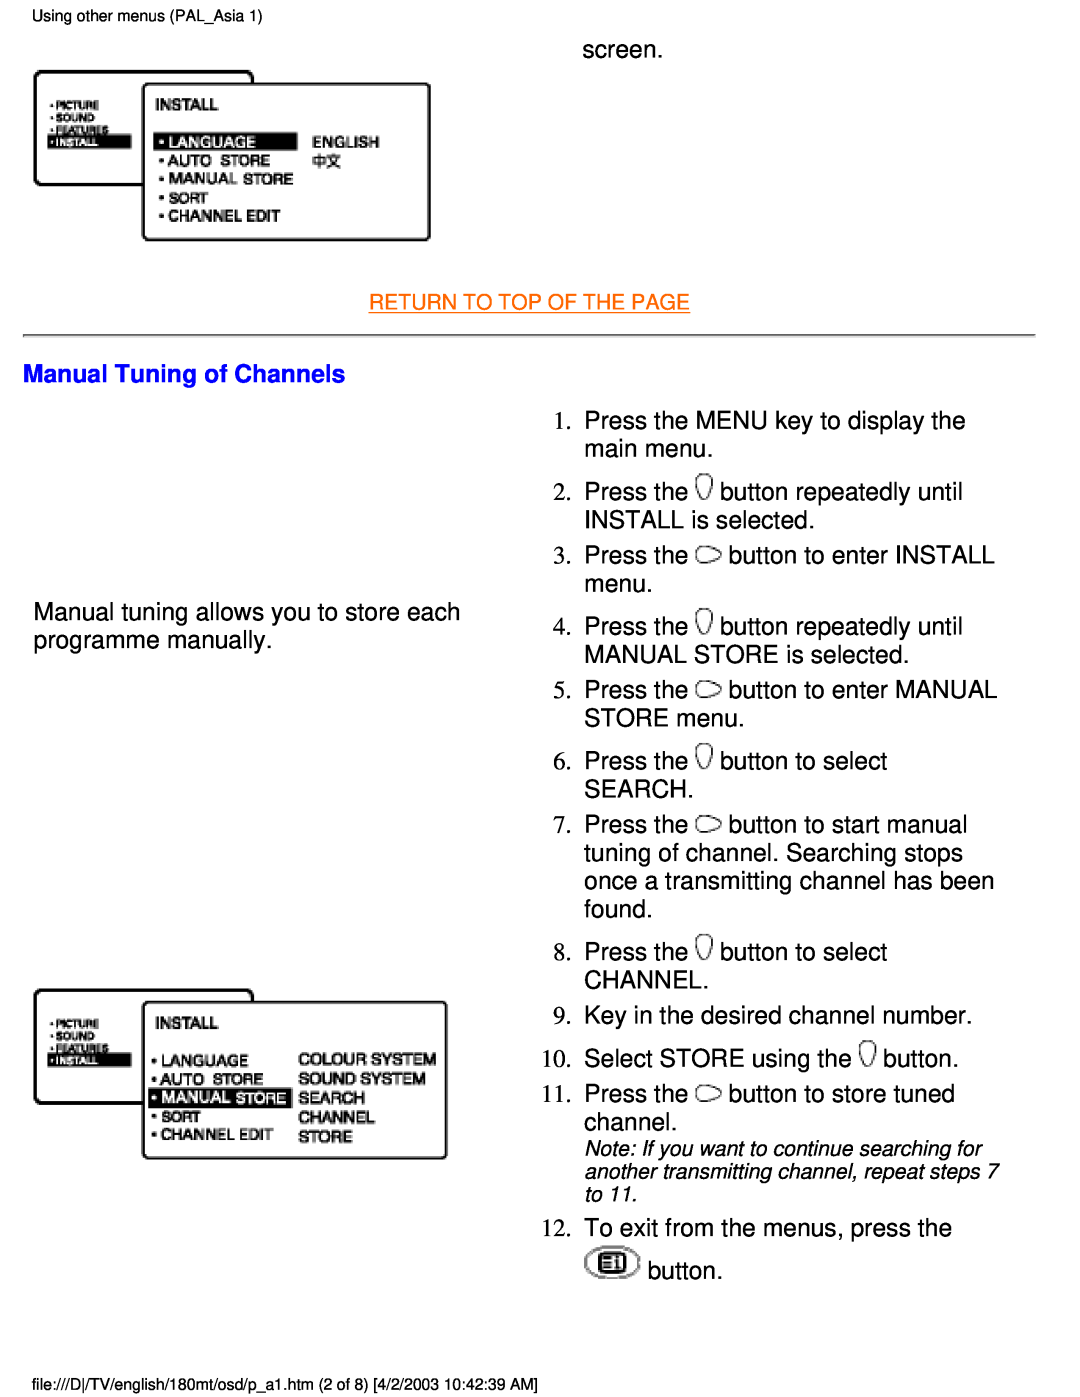 Philips 180MT manual Manual Tuning of Channels 